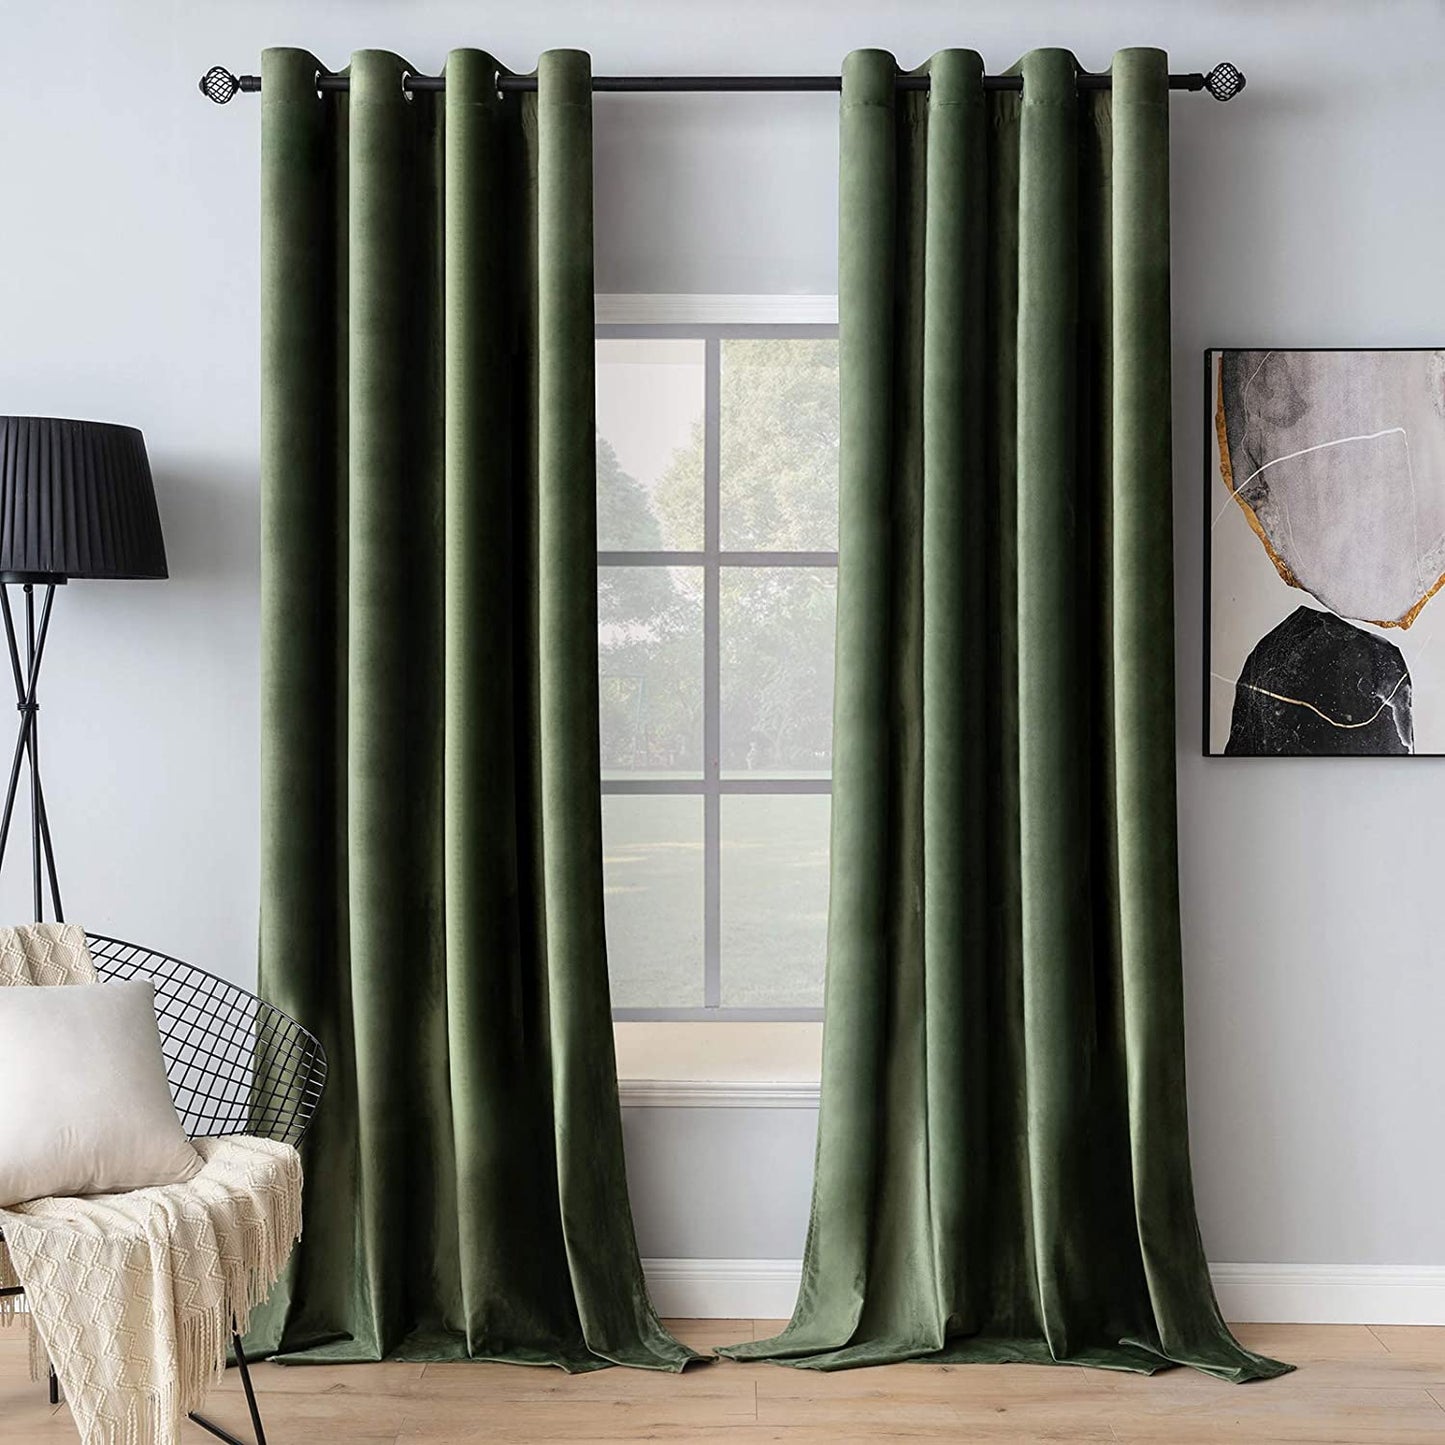 MIULEE Velvet Curtains Olive Green Elegant Grommet Curtains Thermal Insulated Soundproof Room Darkening Curtains/Drapes for Classical Living Room Bedroom Decor 52 X 84 Inch Set of 2  MIULEE Olive Green W52 X L96 